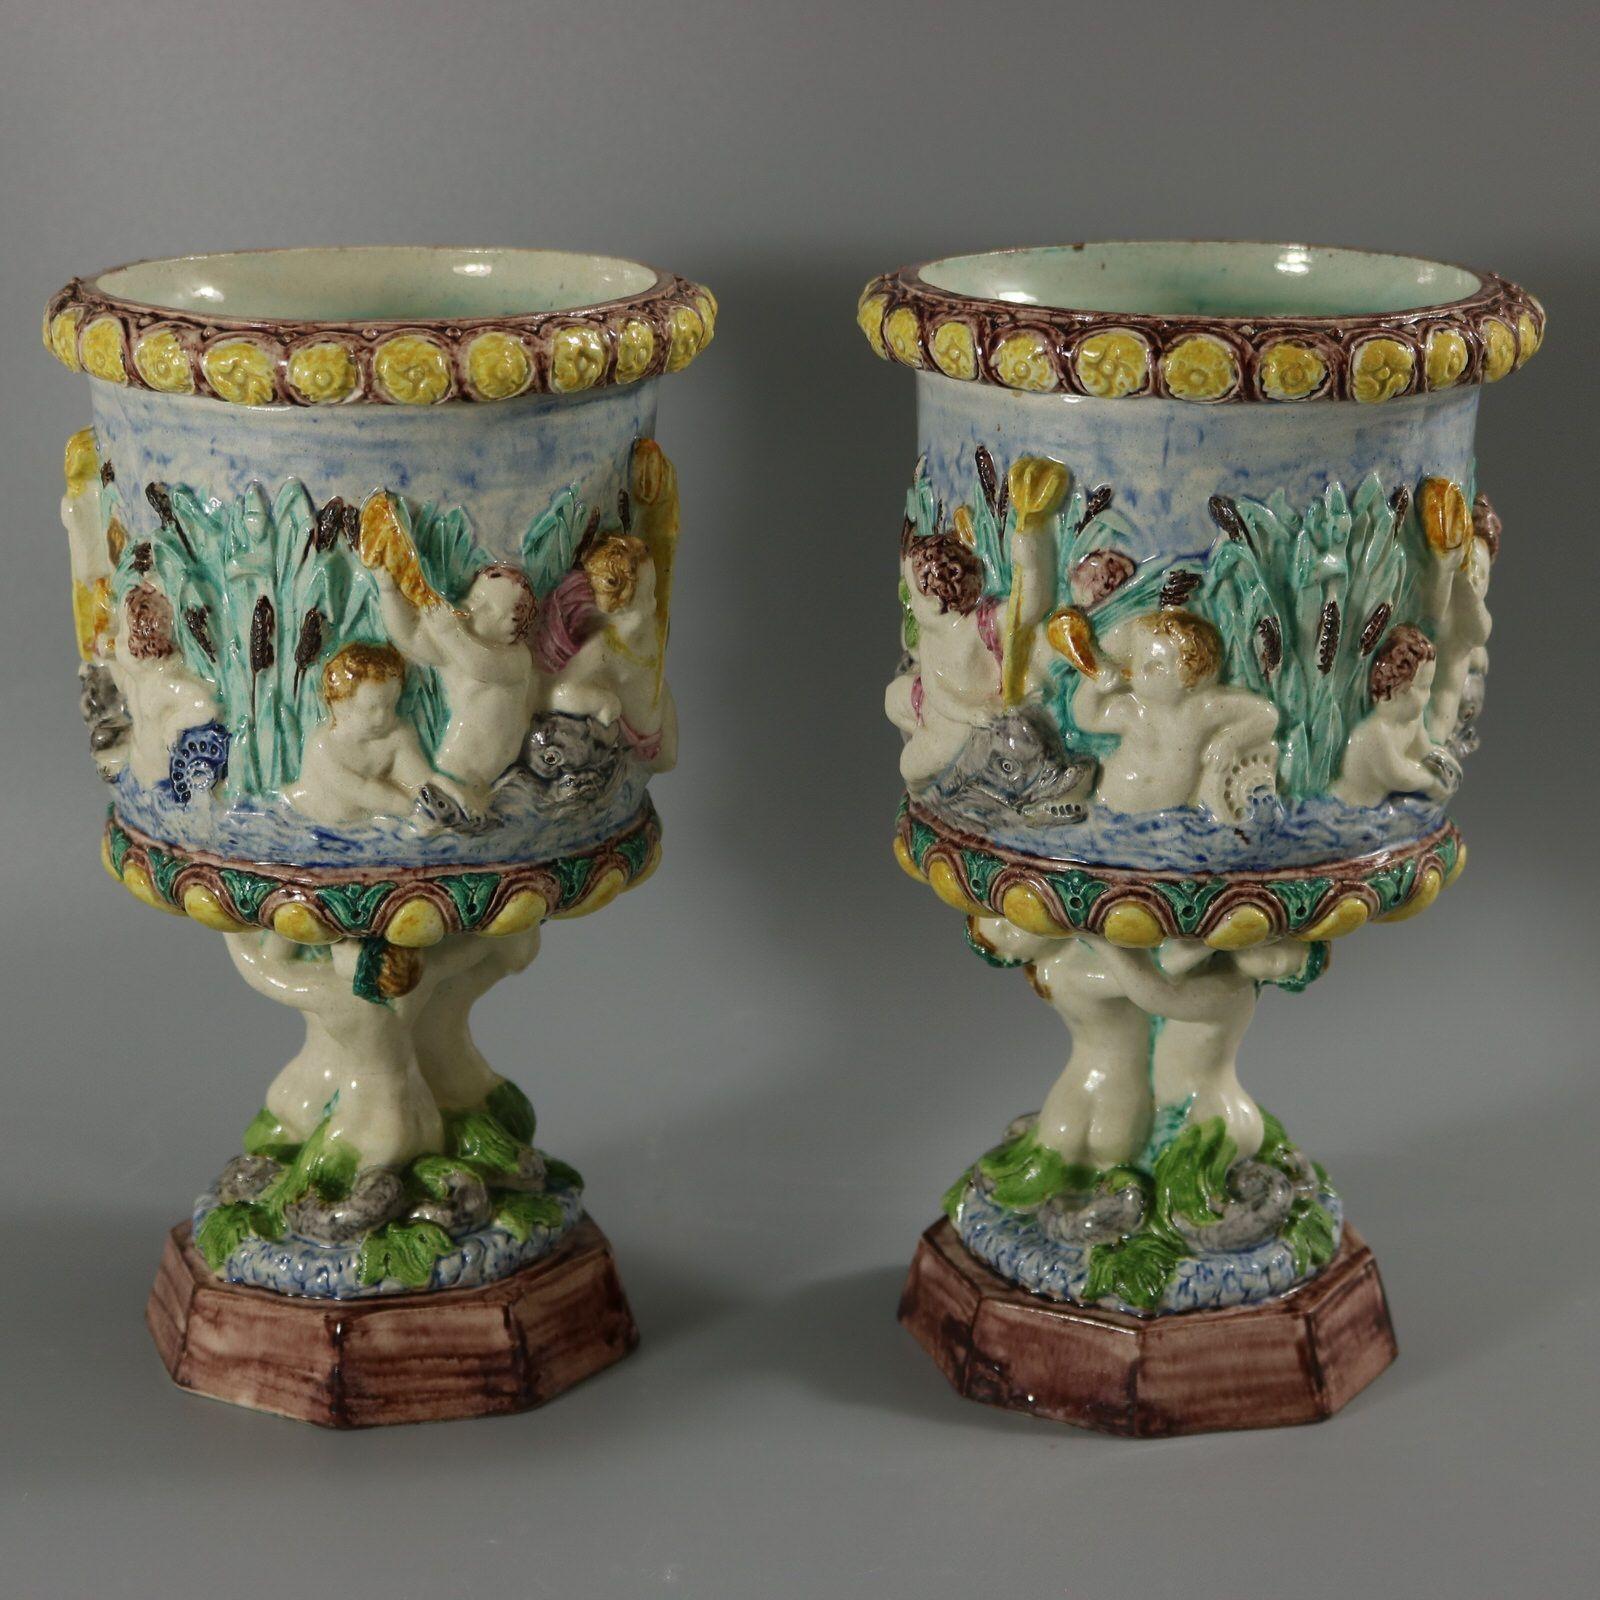 Pair of Thomas Sergent Majolica vases with a mythological theme which feature a river scene around the sides, with putti, dolphins, reeds and shells. The base stem in the form of merboys holding up the vessel. Colouration: blue, green, yellow, are